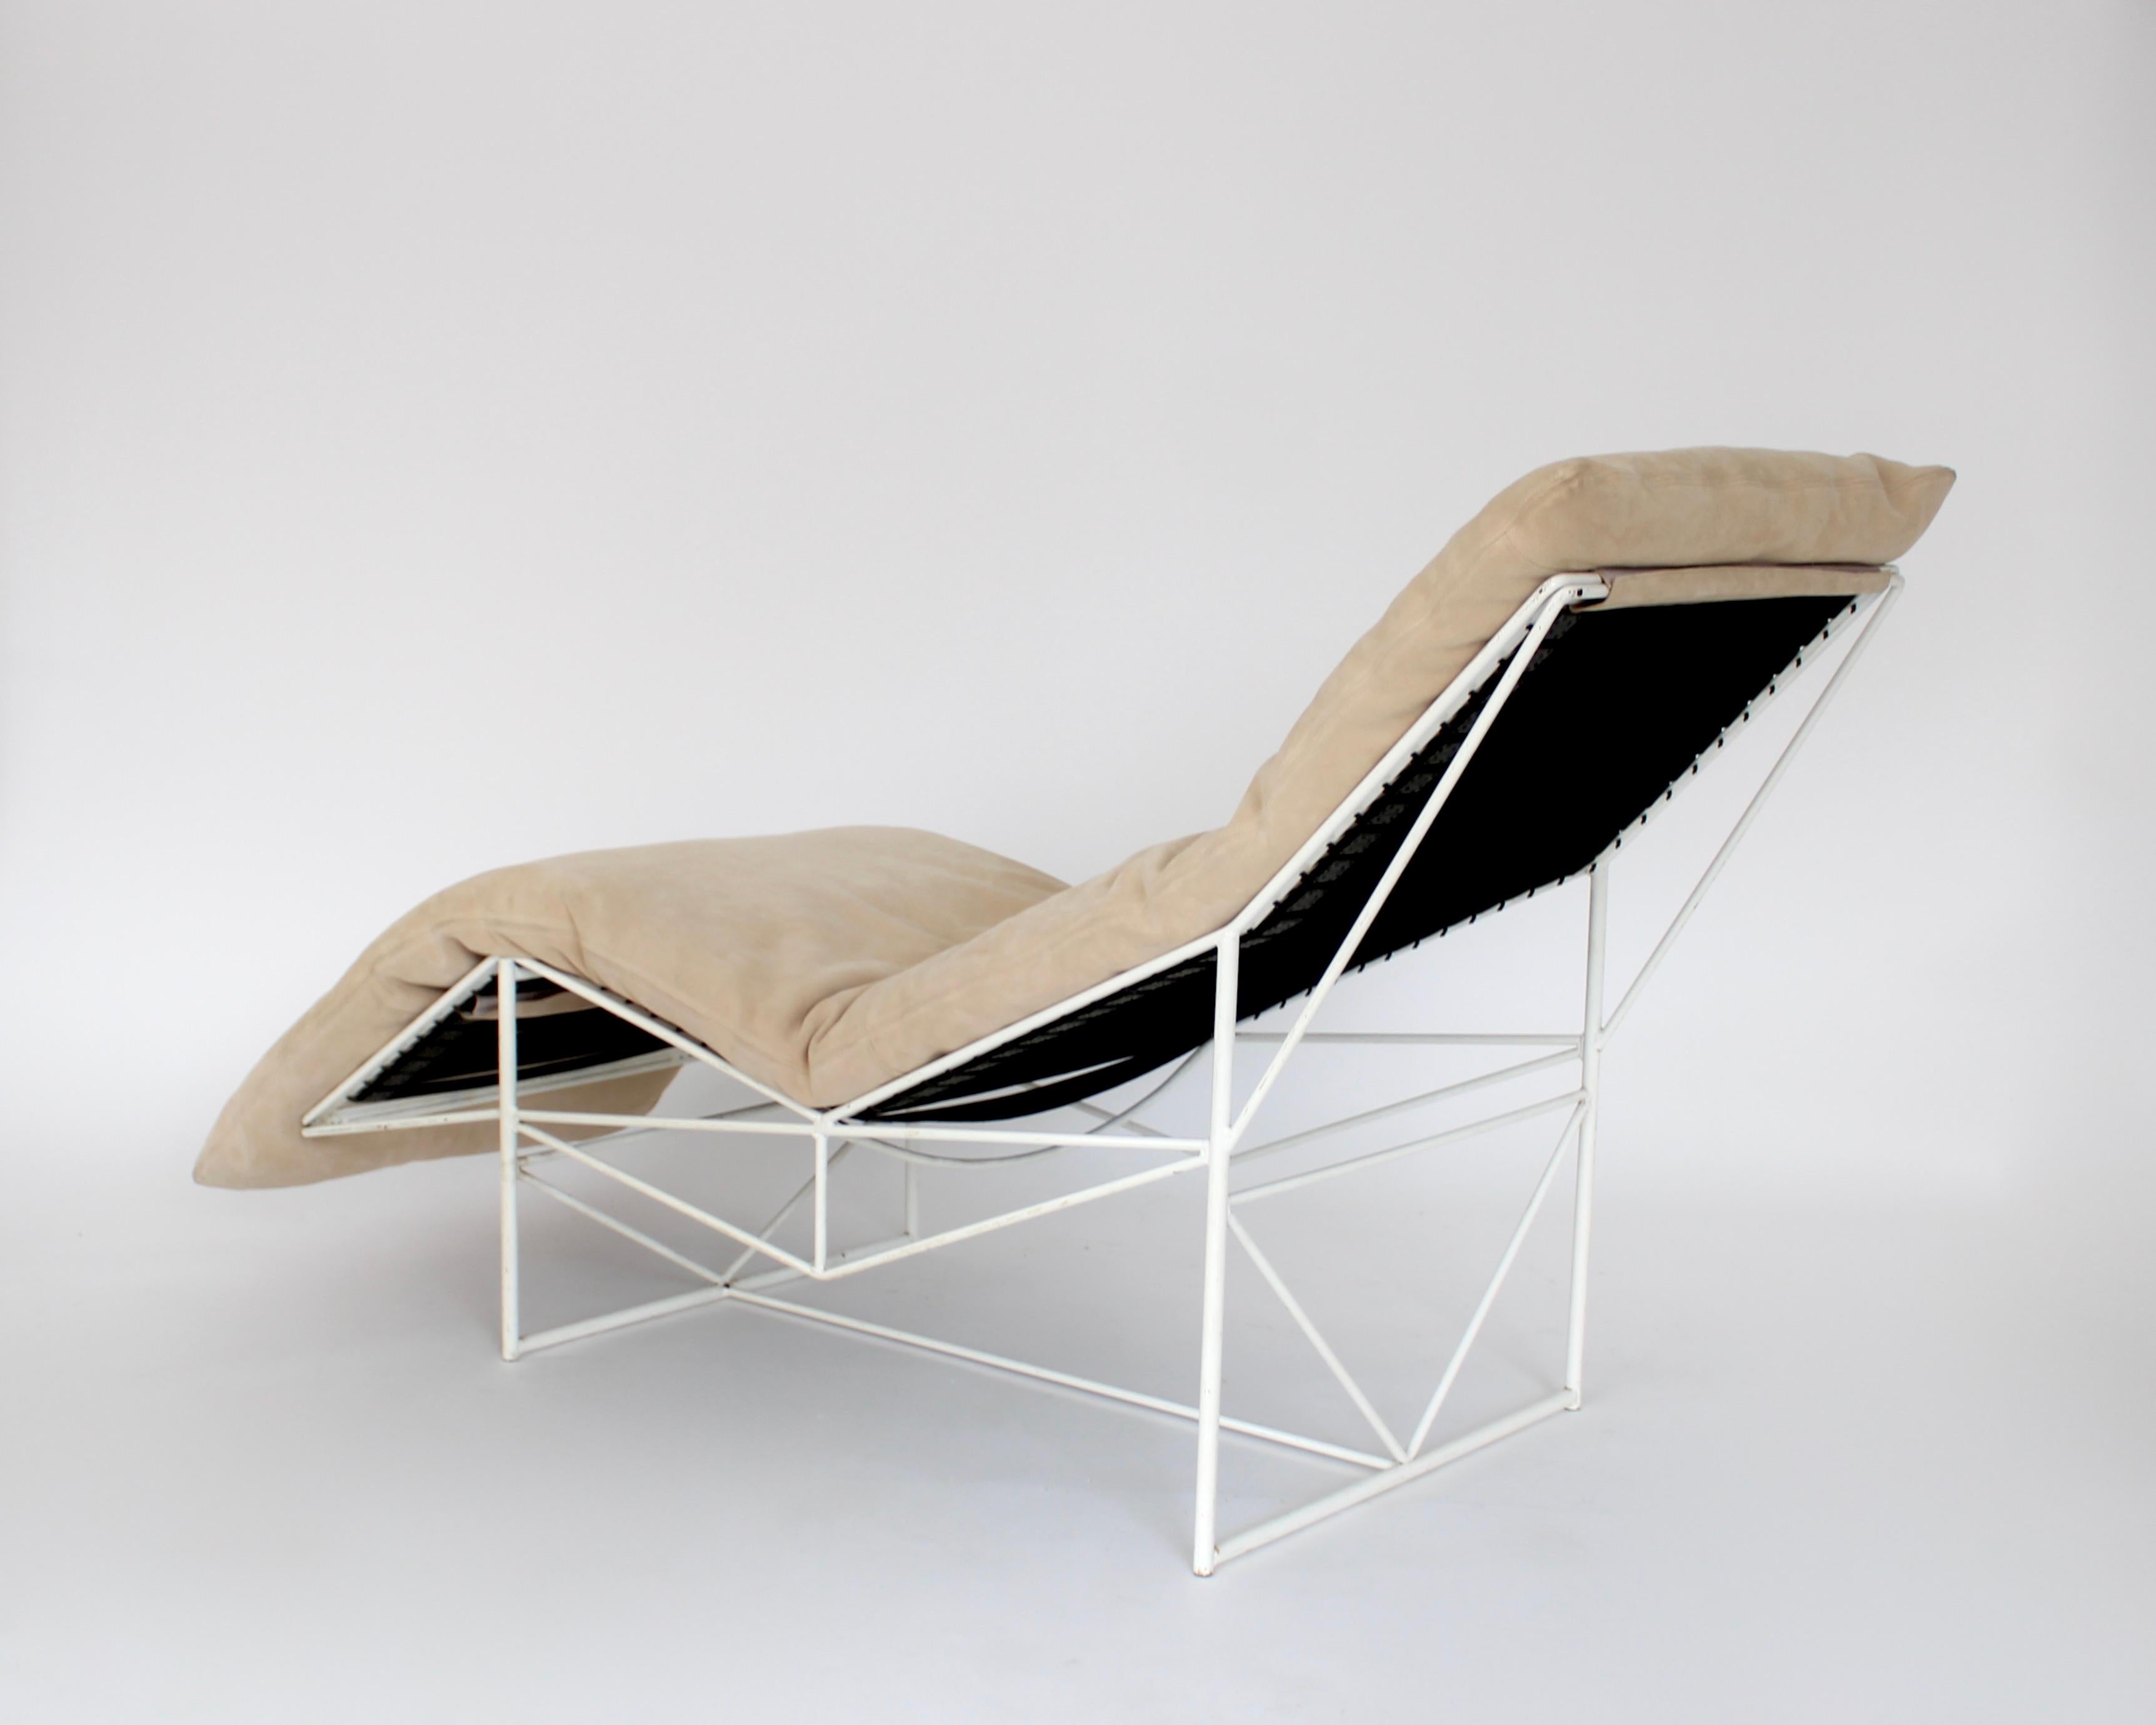 Steel Chaise Italian by Paolo Passerini for Uvet Dimensione Cream Suede Cushion For Sale